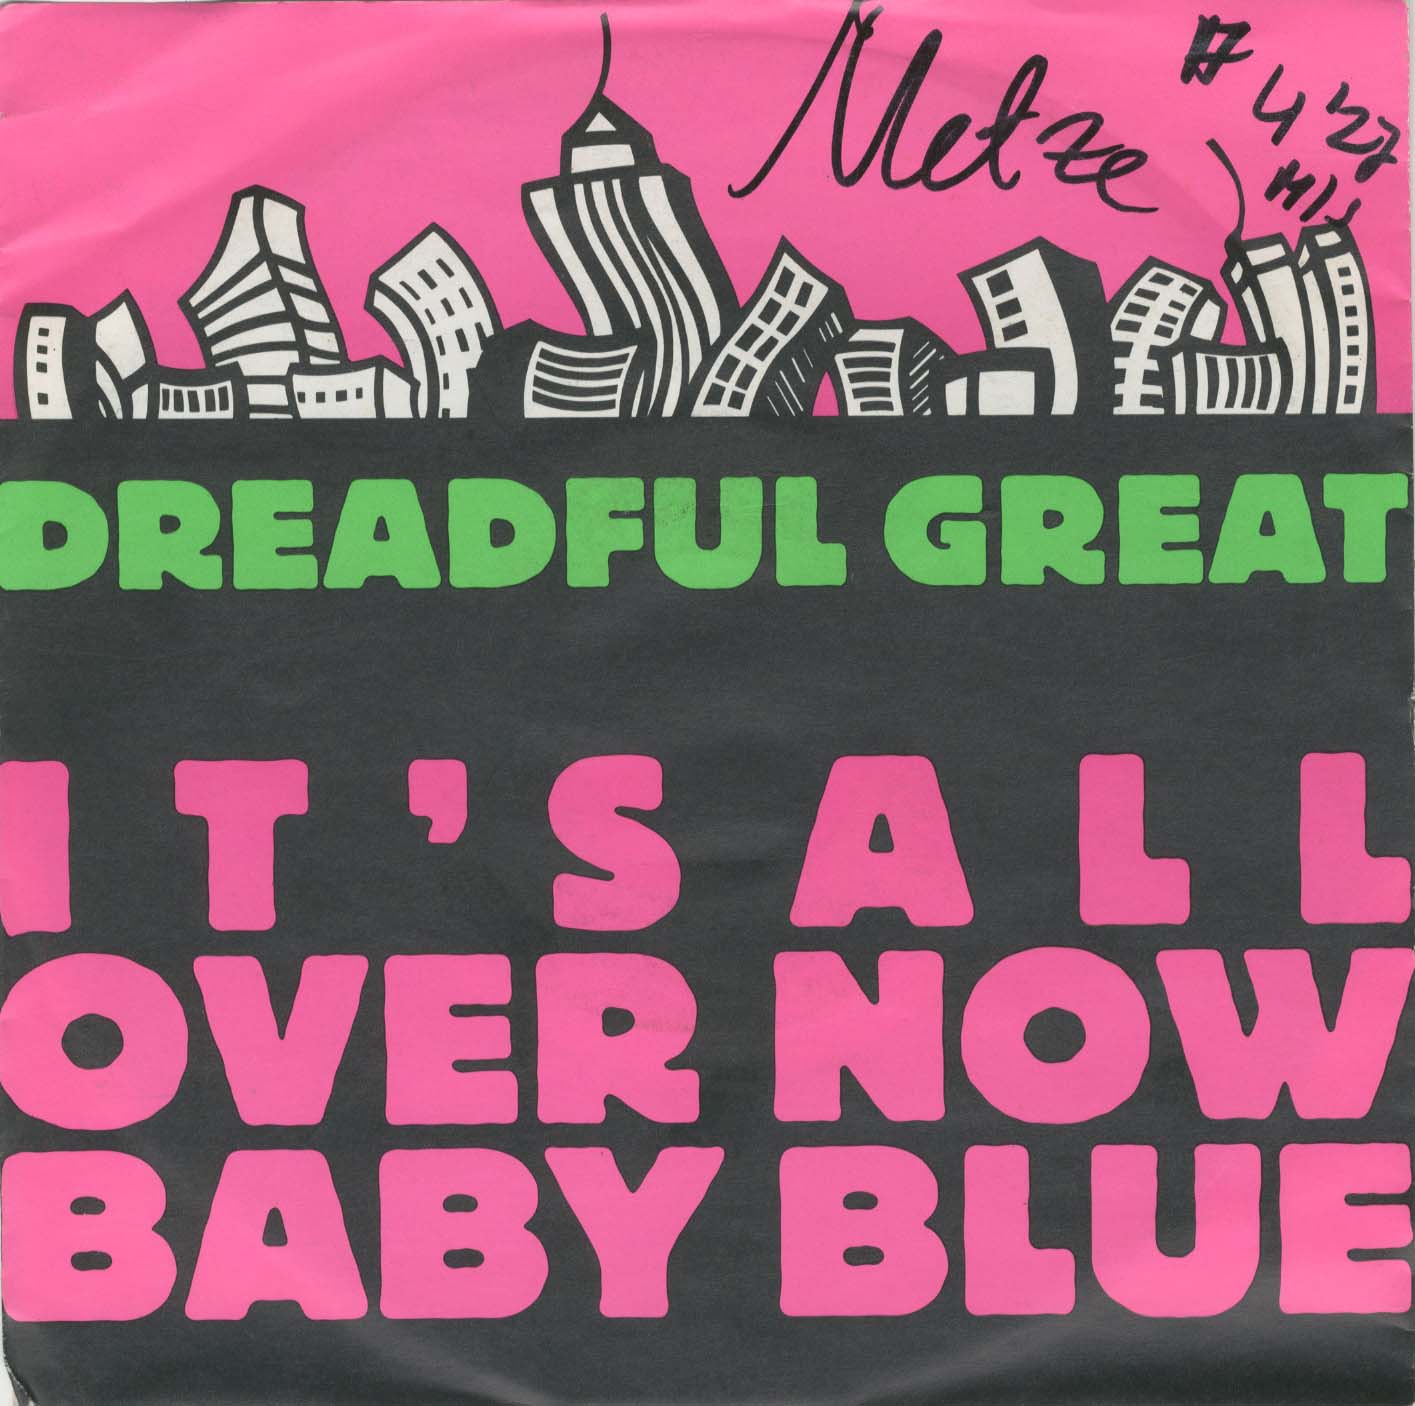 Albumcover Dreadful Great - Its All Over BNow Baby Blue (Radio Version) / You Know